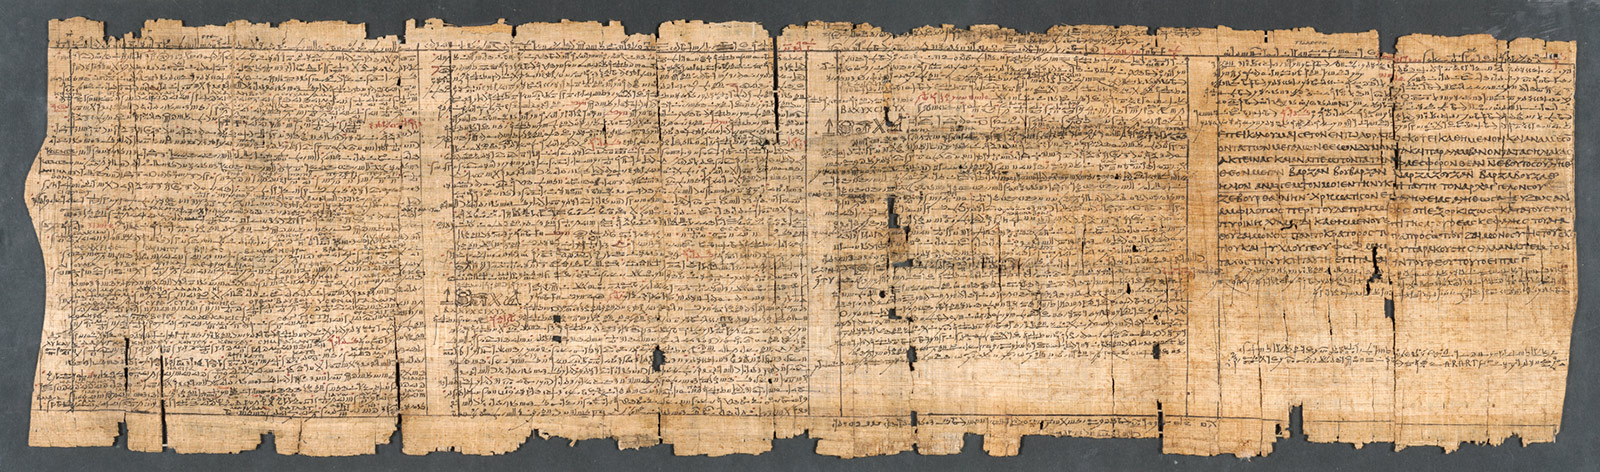 This bilingual papyrus containing magical spells and recipes dates from the early third century A.D. and is written in both Greek and Demotic. In some passages, the Greek text is also transliterated into Demotic, and vice versa. London Magical Papyrus, A.D. 200–225, Romano-Egyptian. Papyrus and ink, 9 7/16 × 33 5/8 in. The British Museum, EA10070,2. On loan from the Trustees of the British Museum. © The Trustees of the British Museum. Featured in the exhibition Beyond the Nile: Egypt and the Classical World